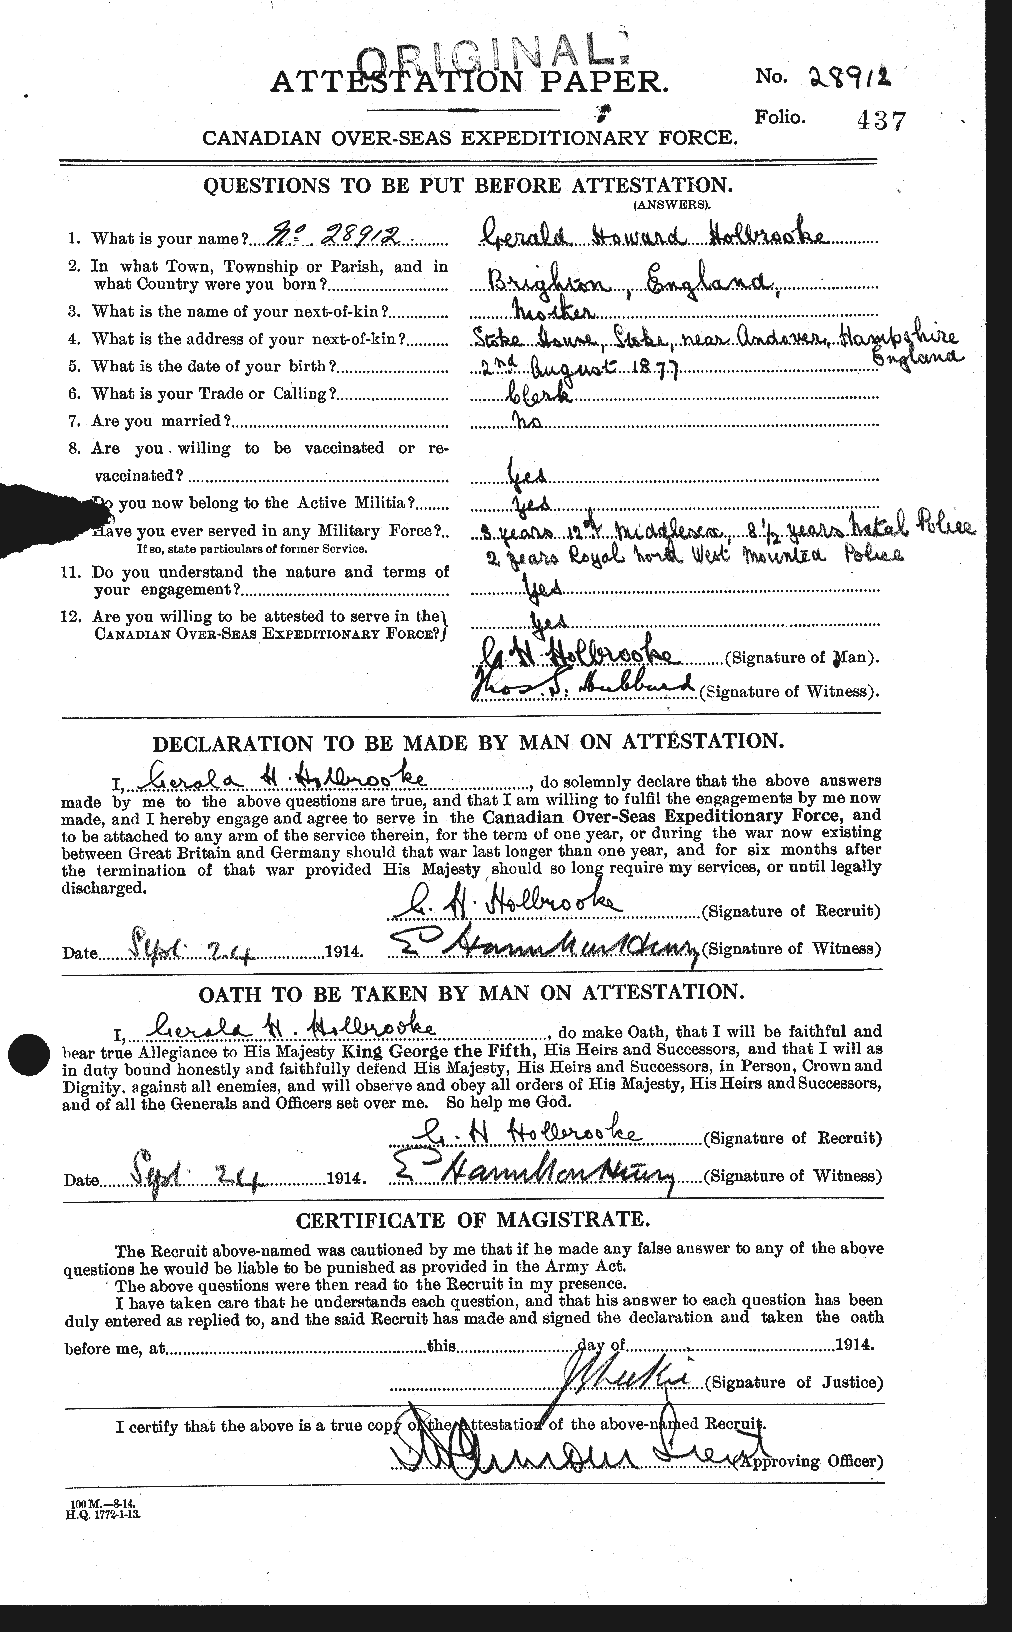 Personnel Records of the First World War - CEF 396618a